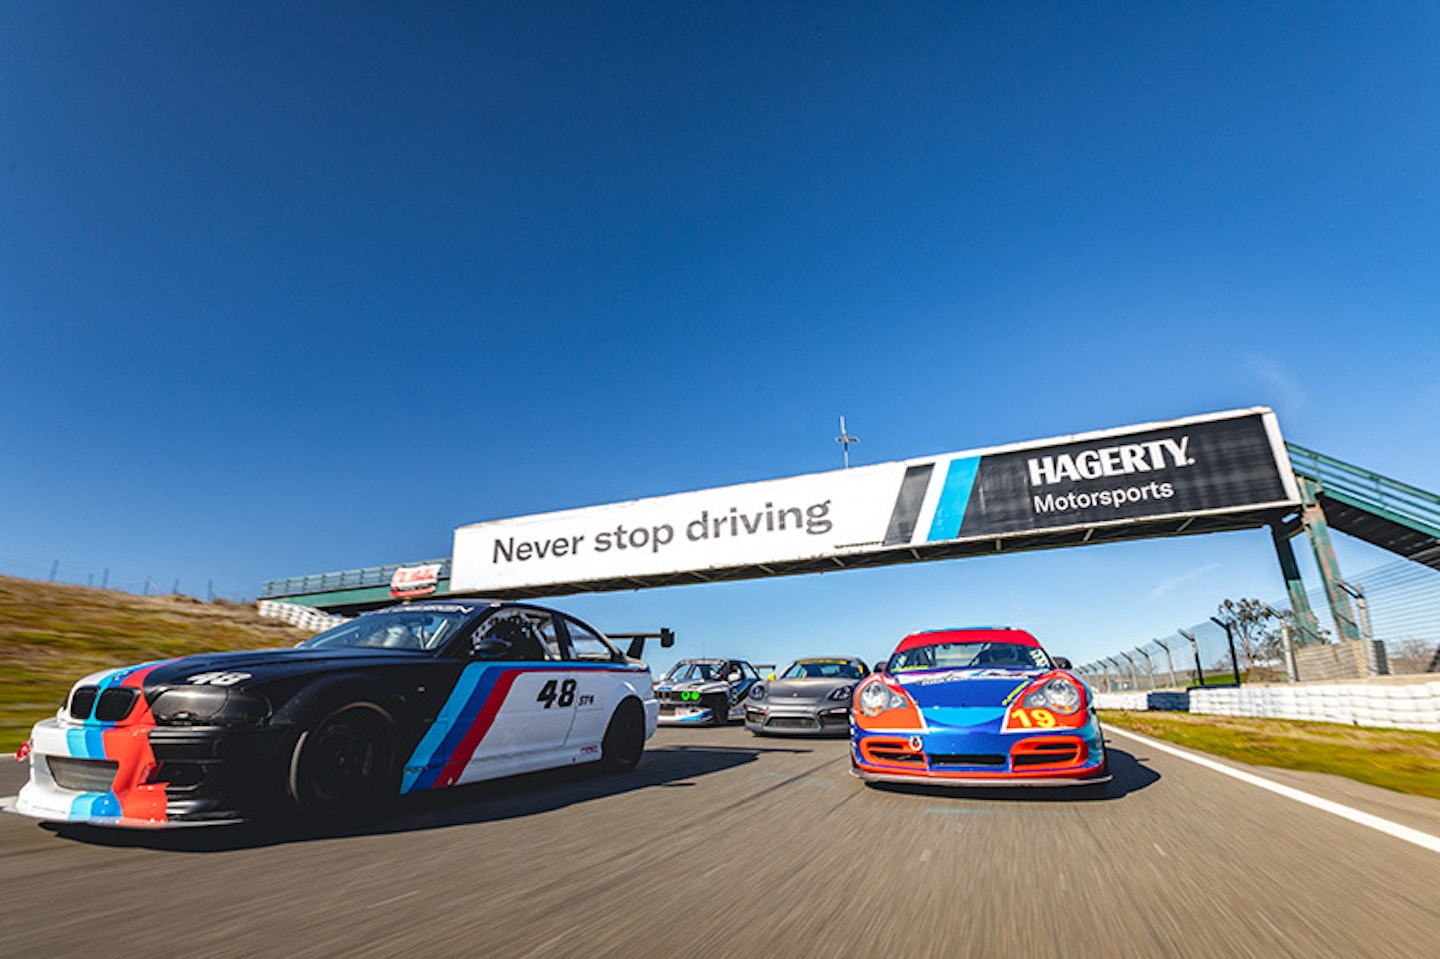 Thunderhill racing under Hagerty banner